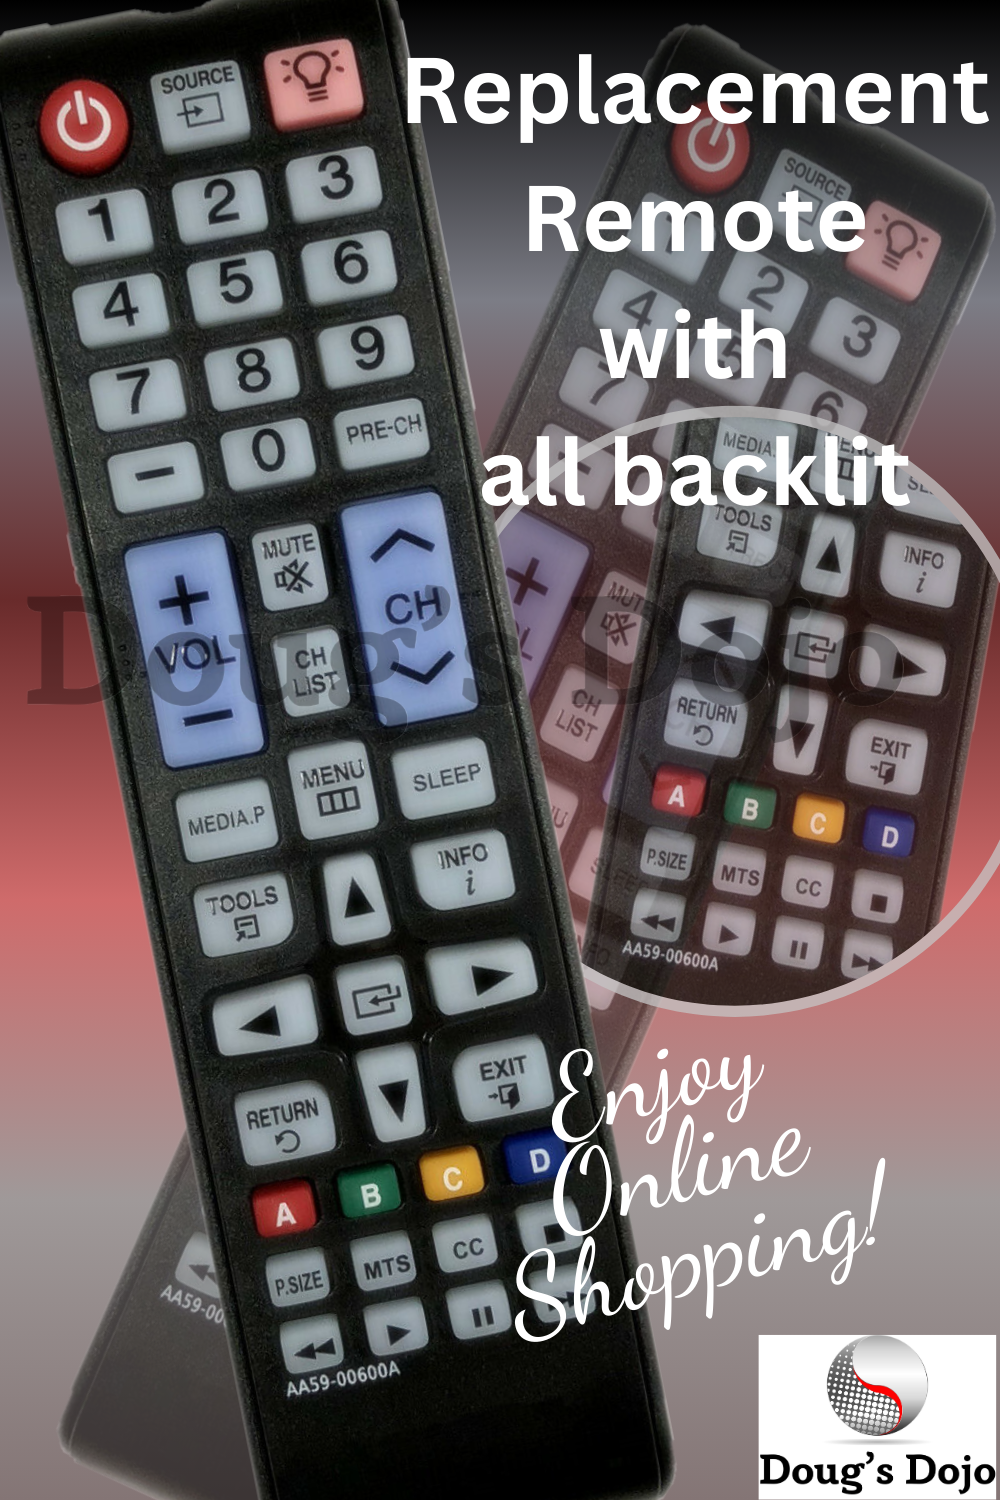 New TV Remote with all backlit light-up buttons for All Samsung Smart TVs